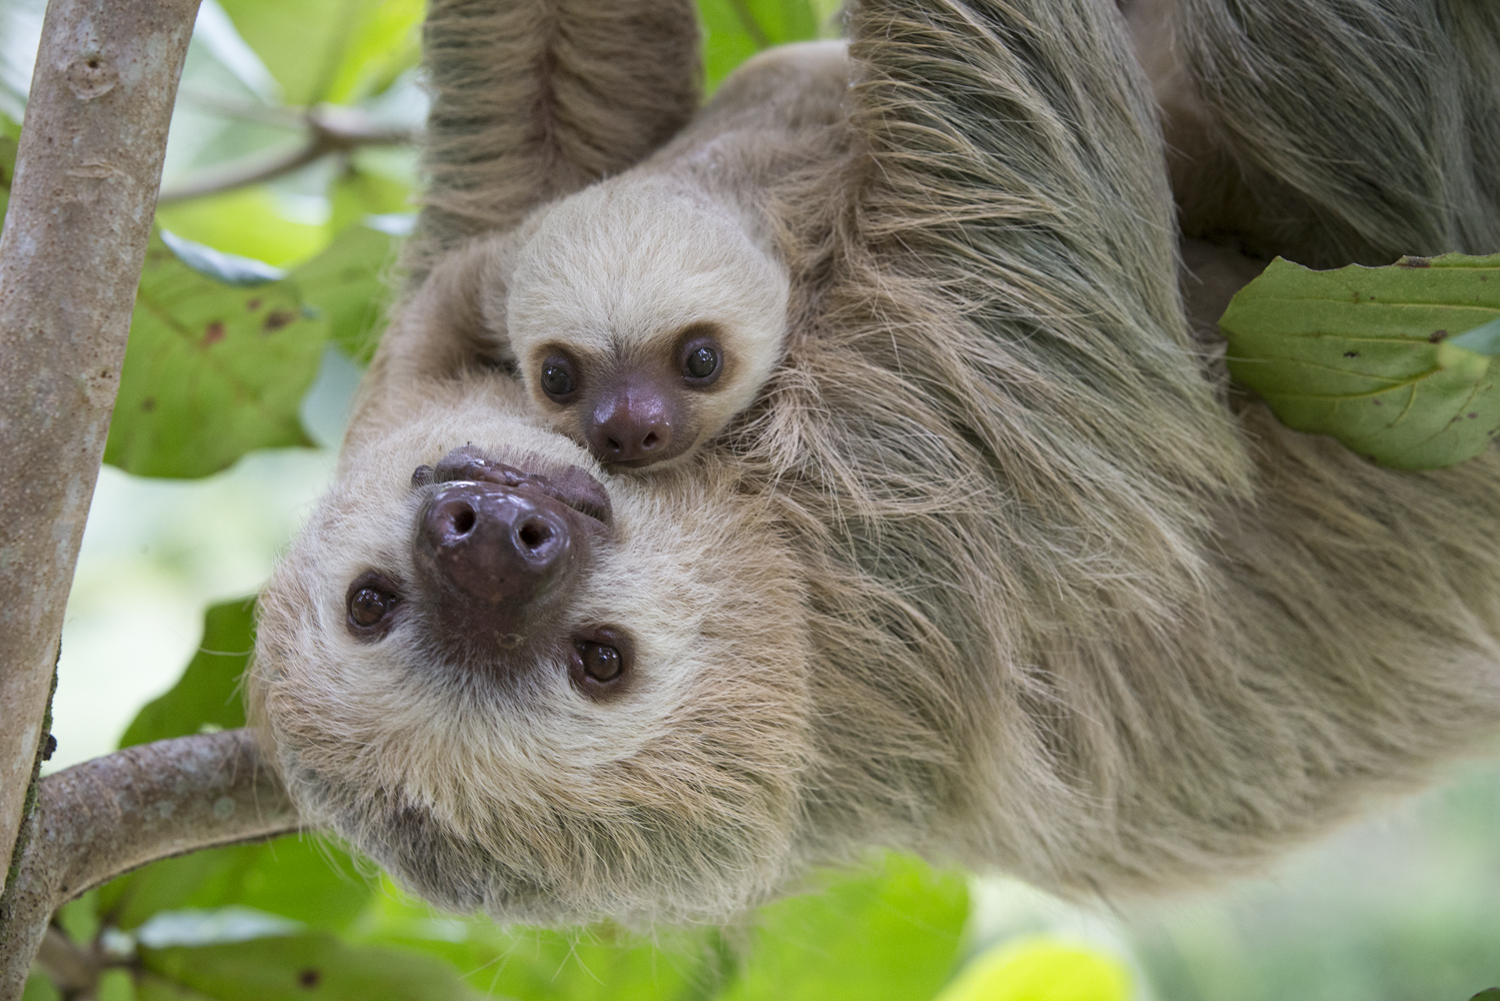 Adopt a Sloth for Mother's Day - The Sloth Conservation Foundation